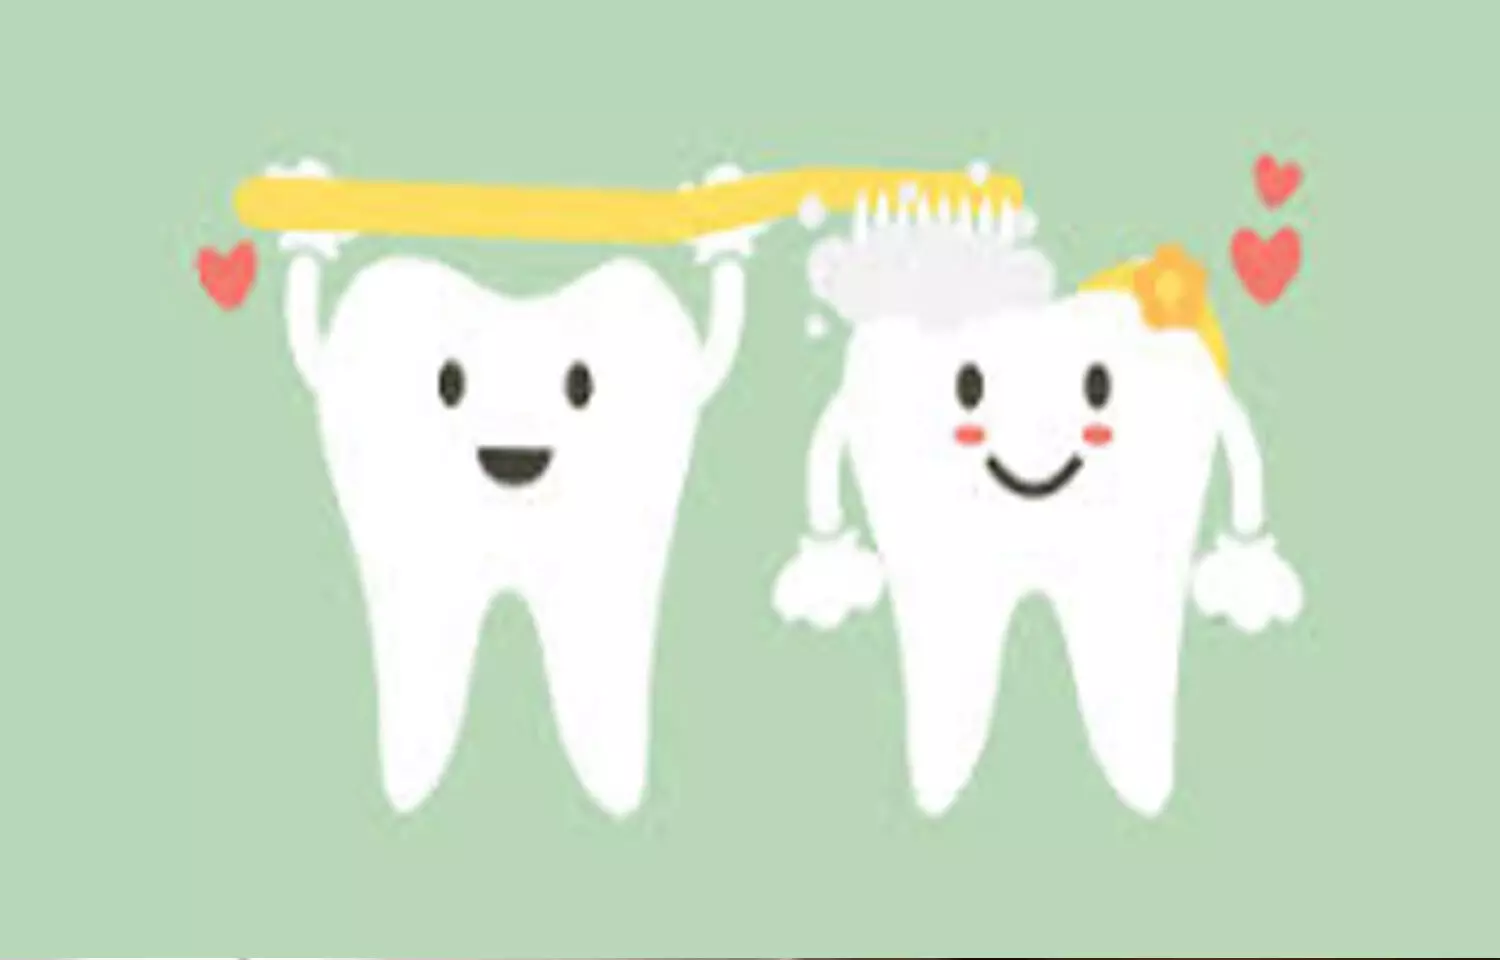 Toothbrushing and interdental cleaning helps prevent dental caries: Finds study